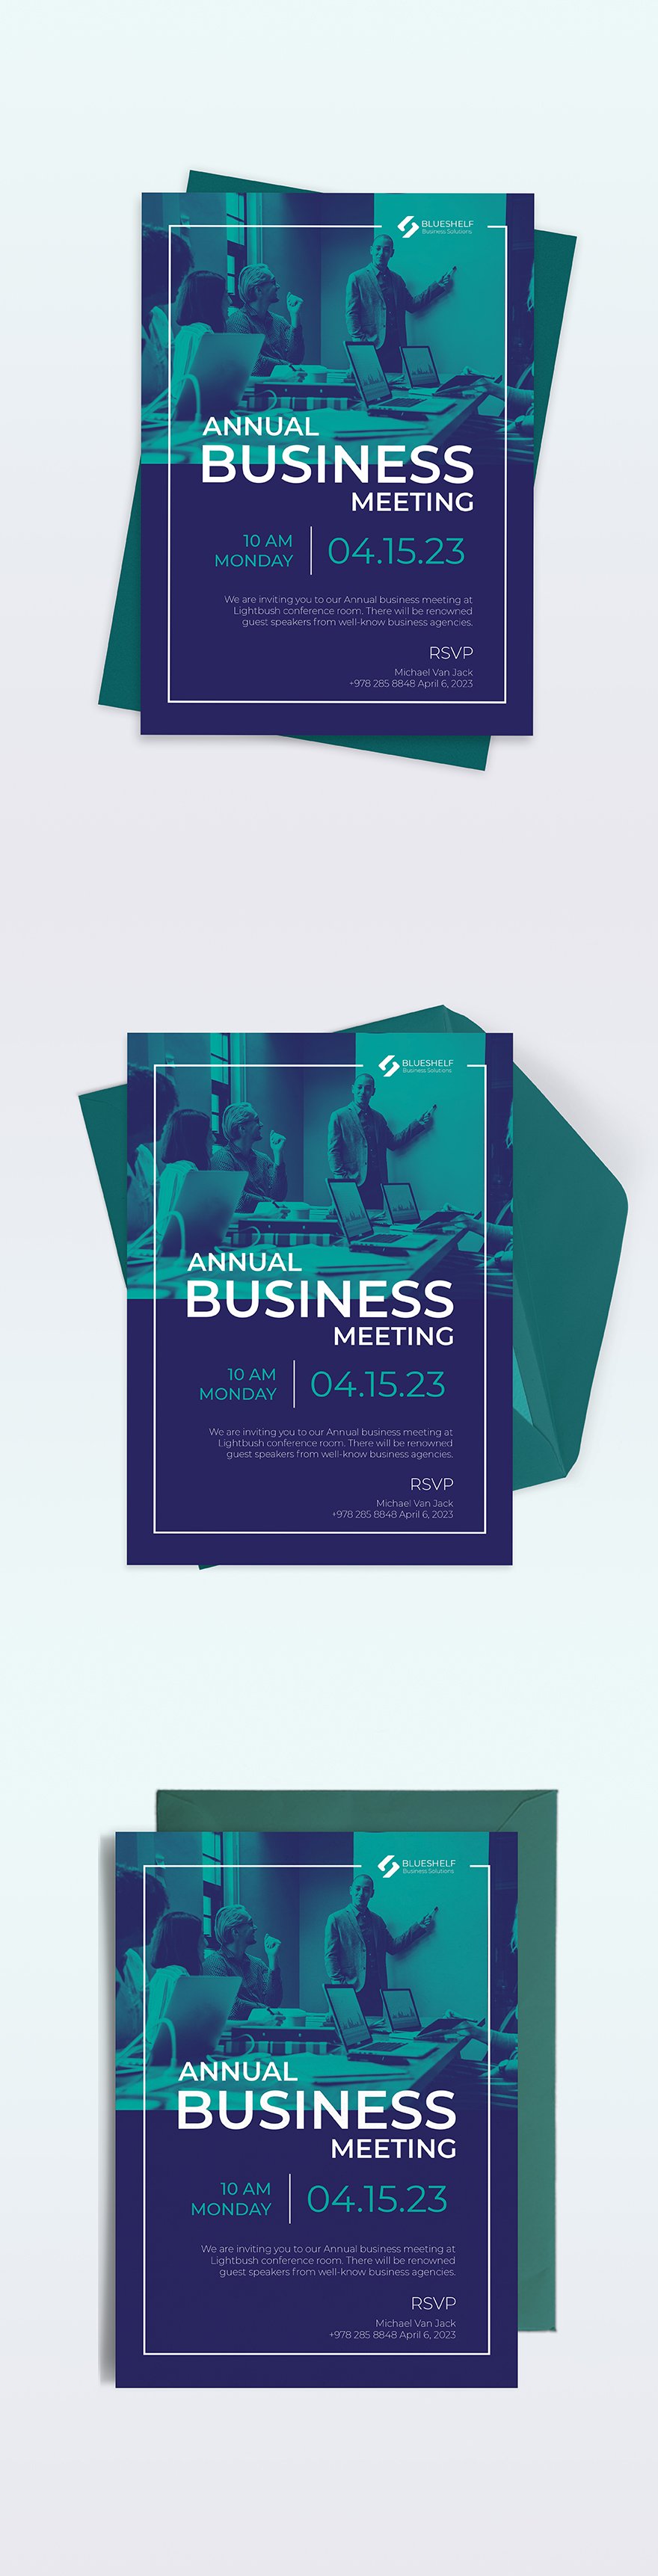 Business Event Email Invitation Template